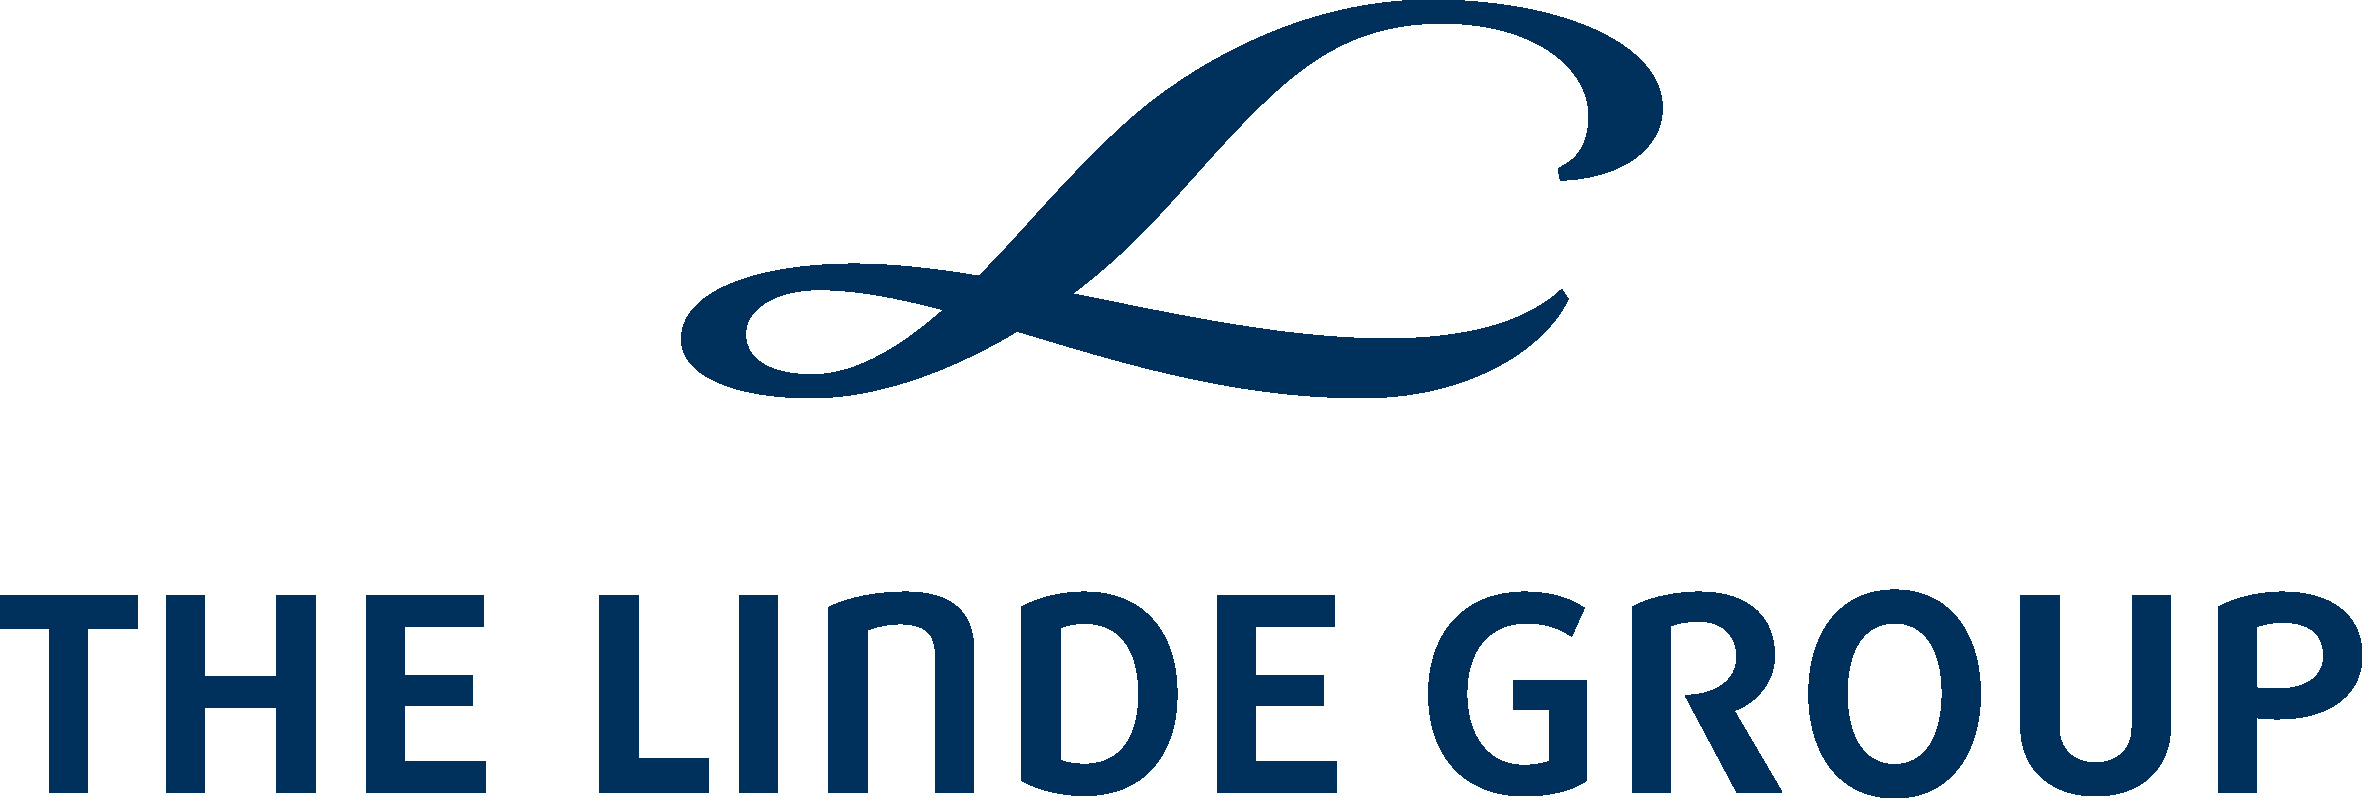 LINDE AG (AMERICAN BUSINESSES)